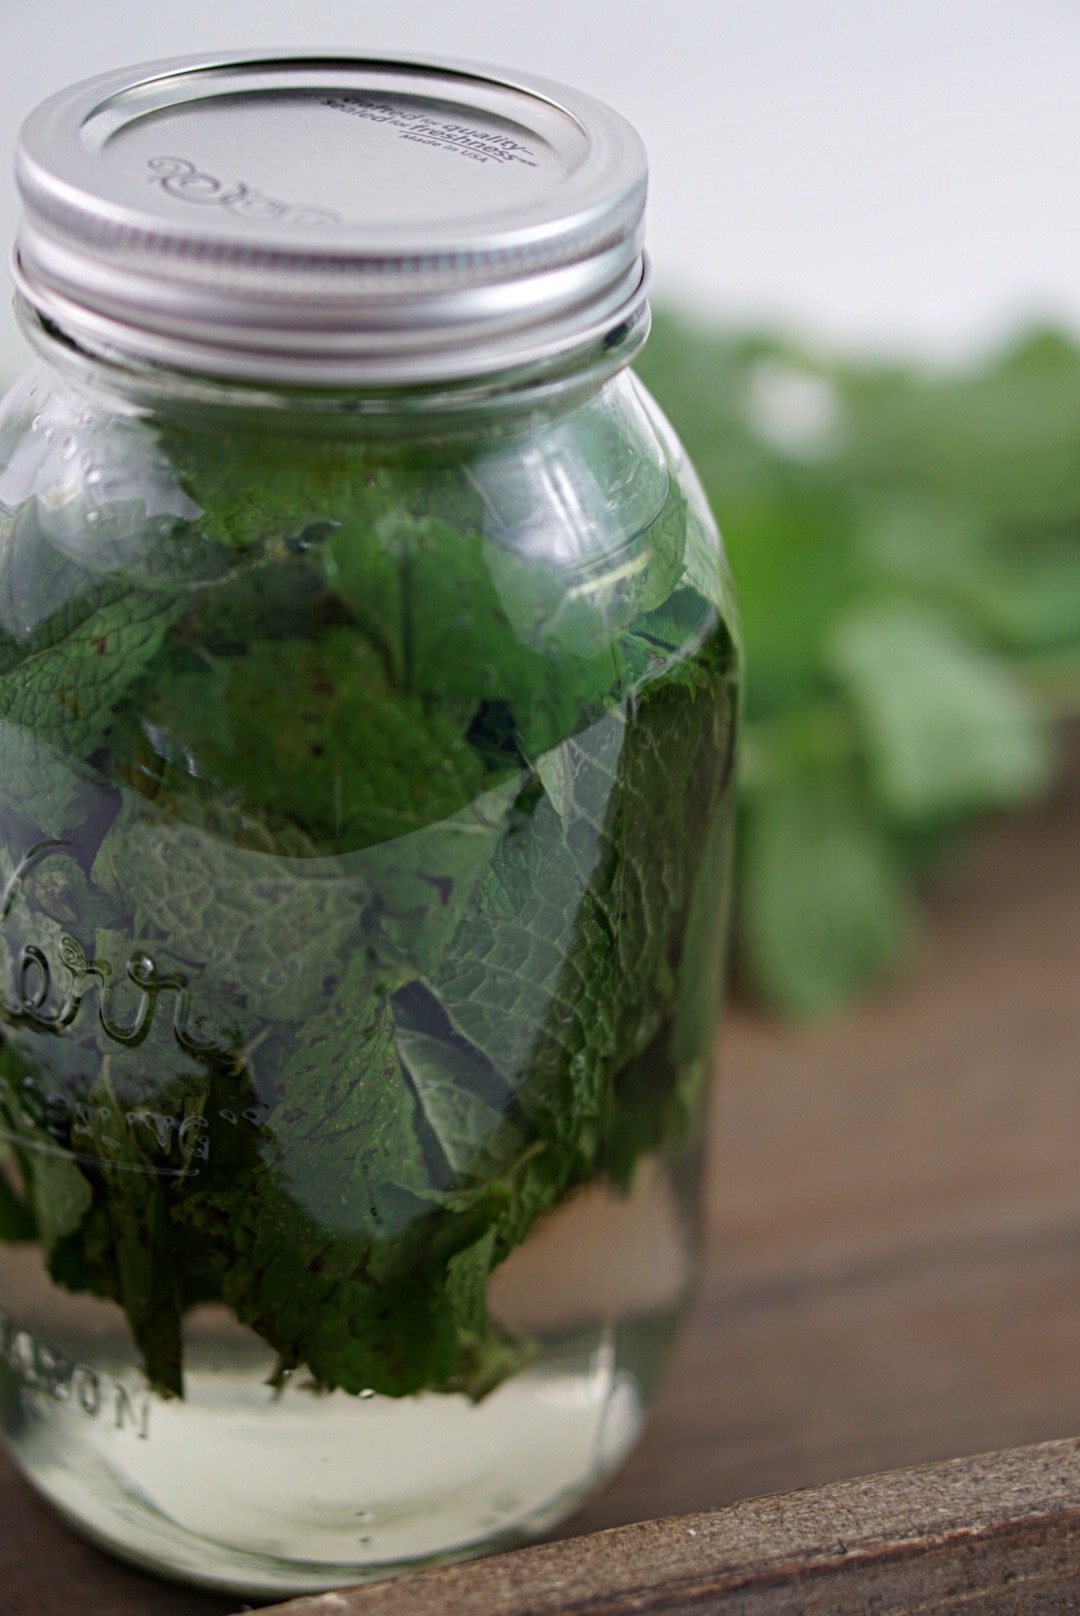 Mint-infused vodka is tasty and easy! All you need is vodka and fresh mint!